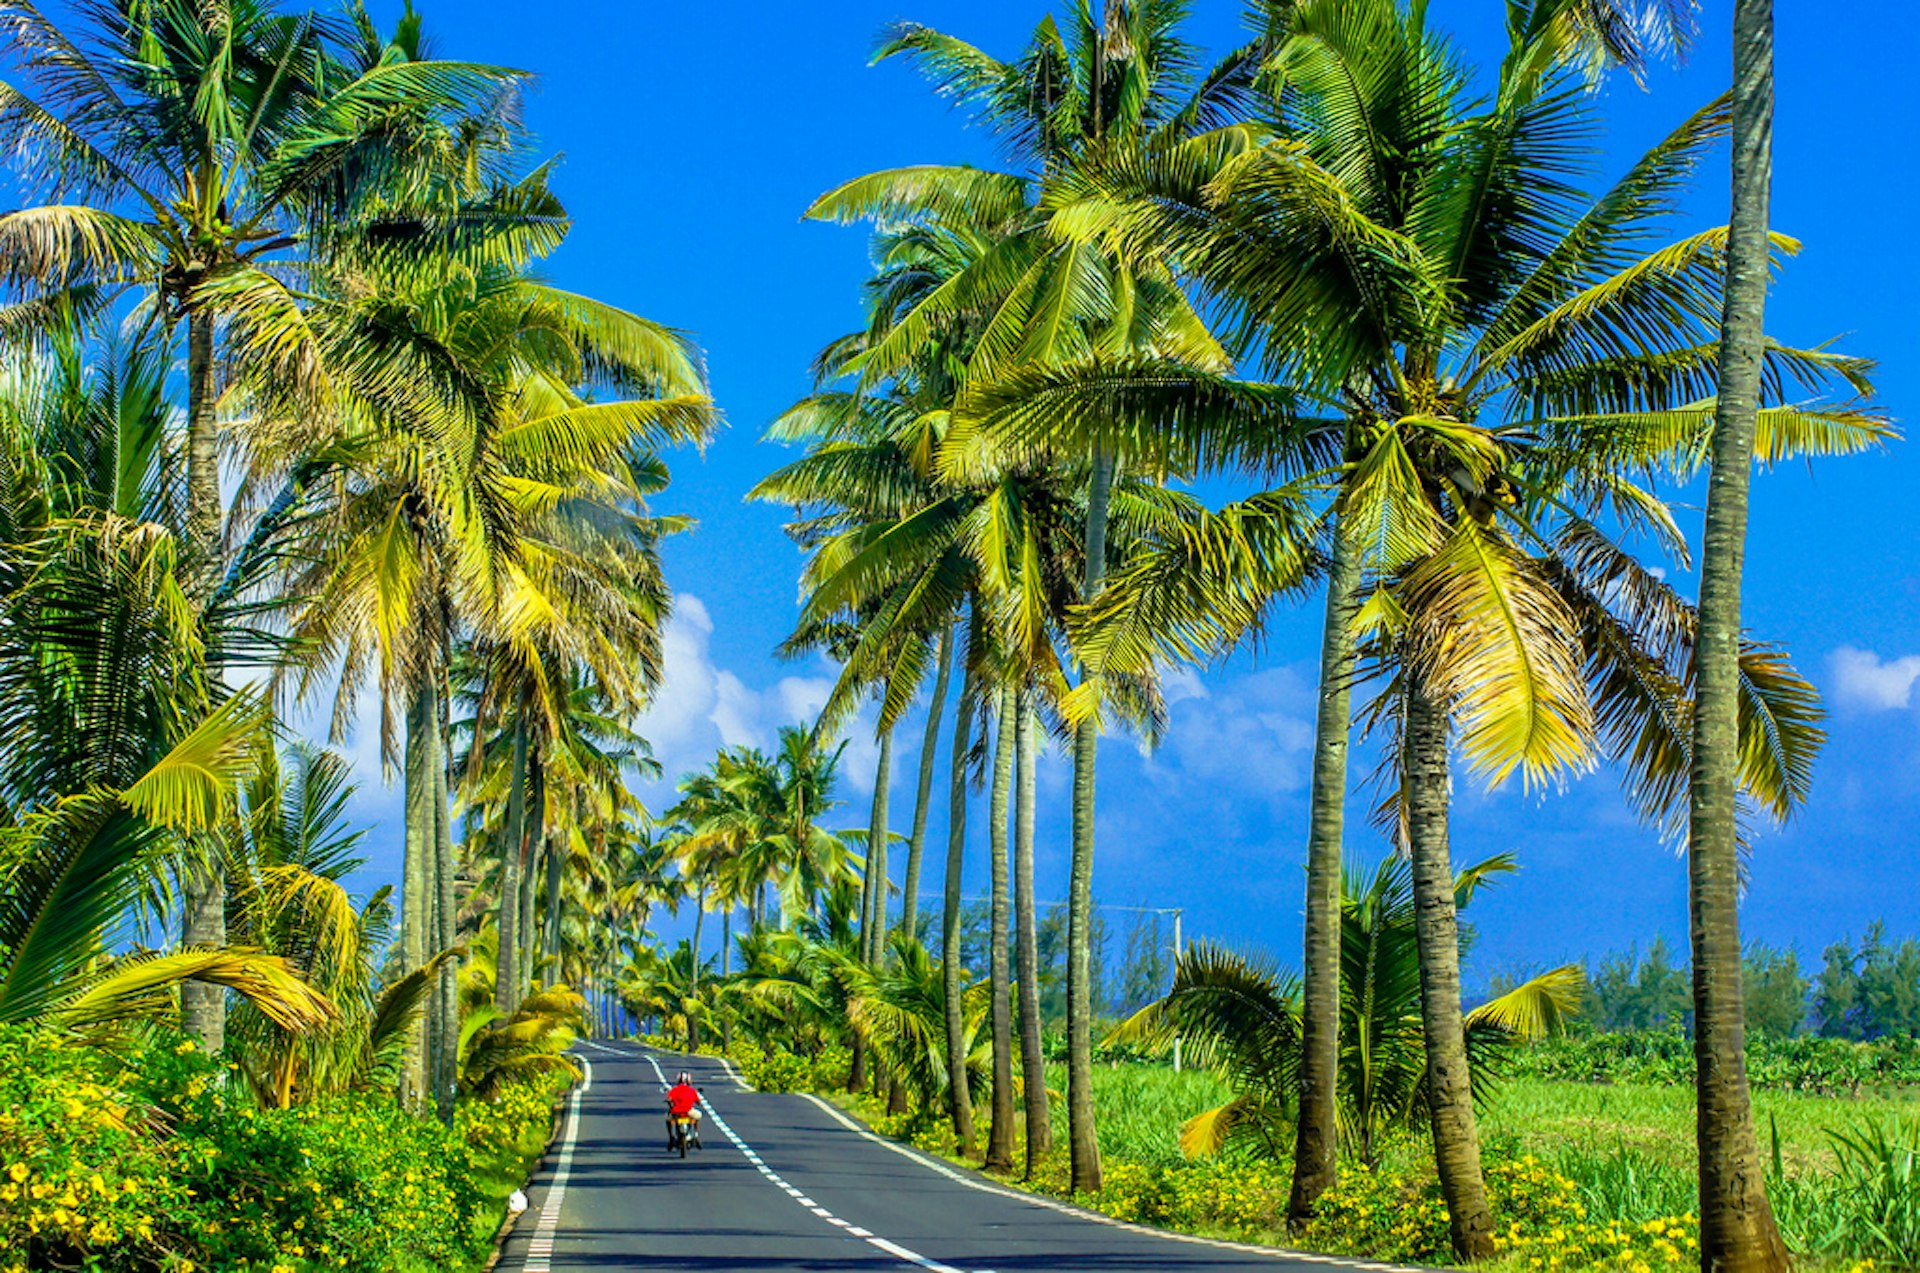 A palm tree-fringed road near Bel Ombre, Mauritius